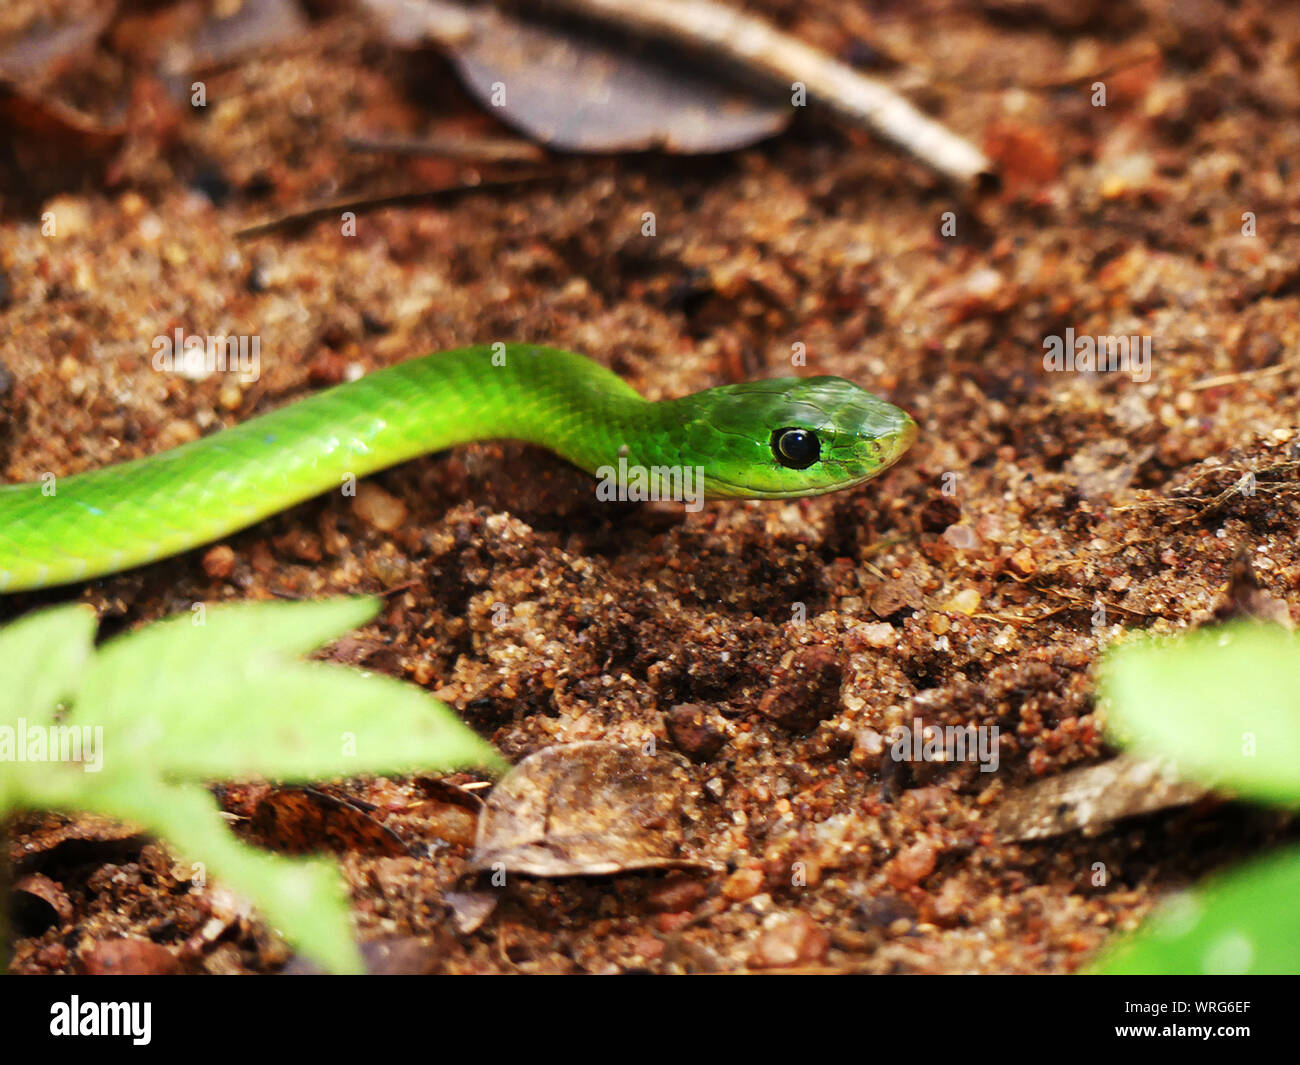 The Slender Green Sanke is a thin snake about 1m long. They are diurnal, harmless and can be encountered on the ground or in the trees. Stock Photo